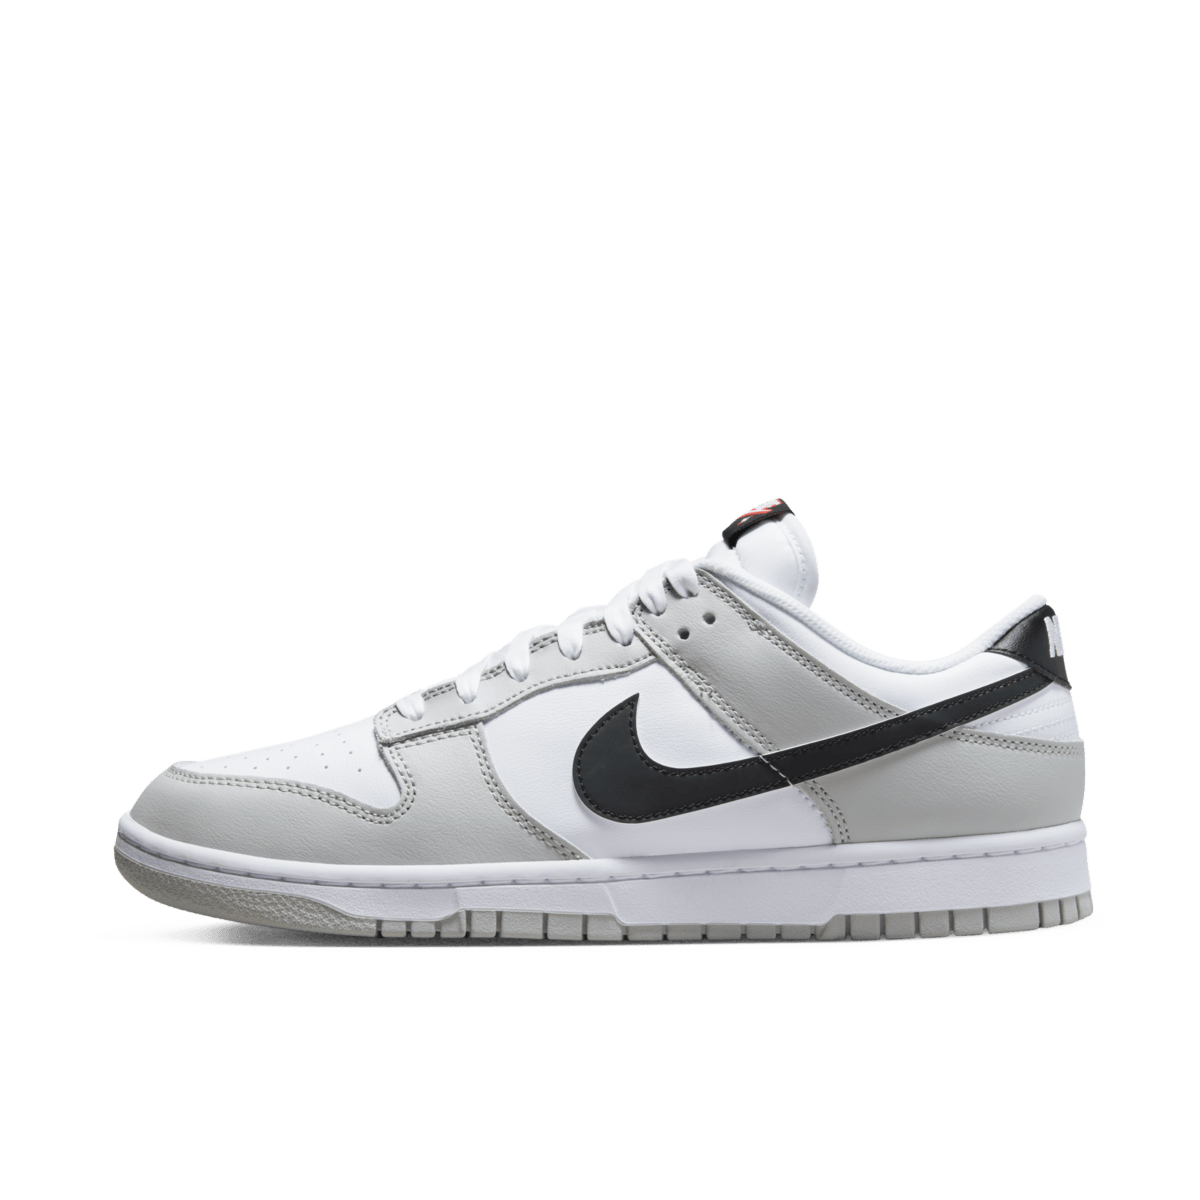 Nike Dunk Low 'Grey' - Lottery Pack DR9654-001